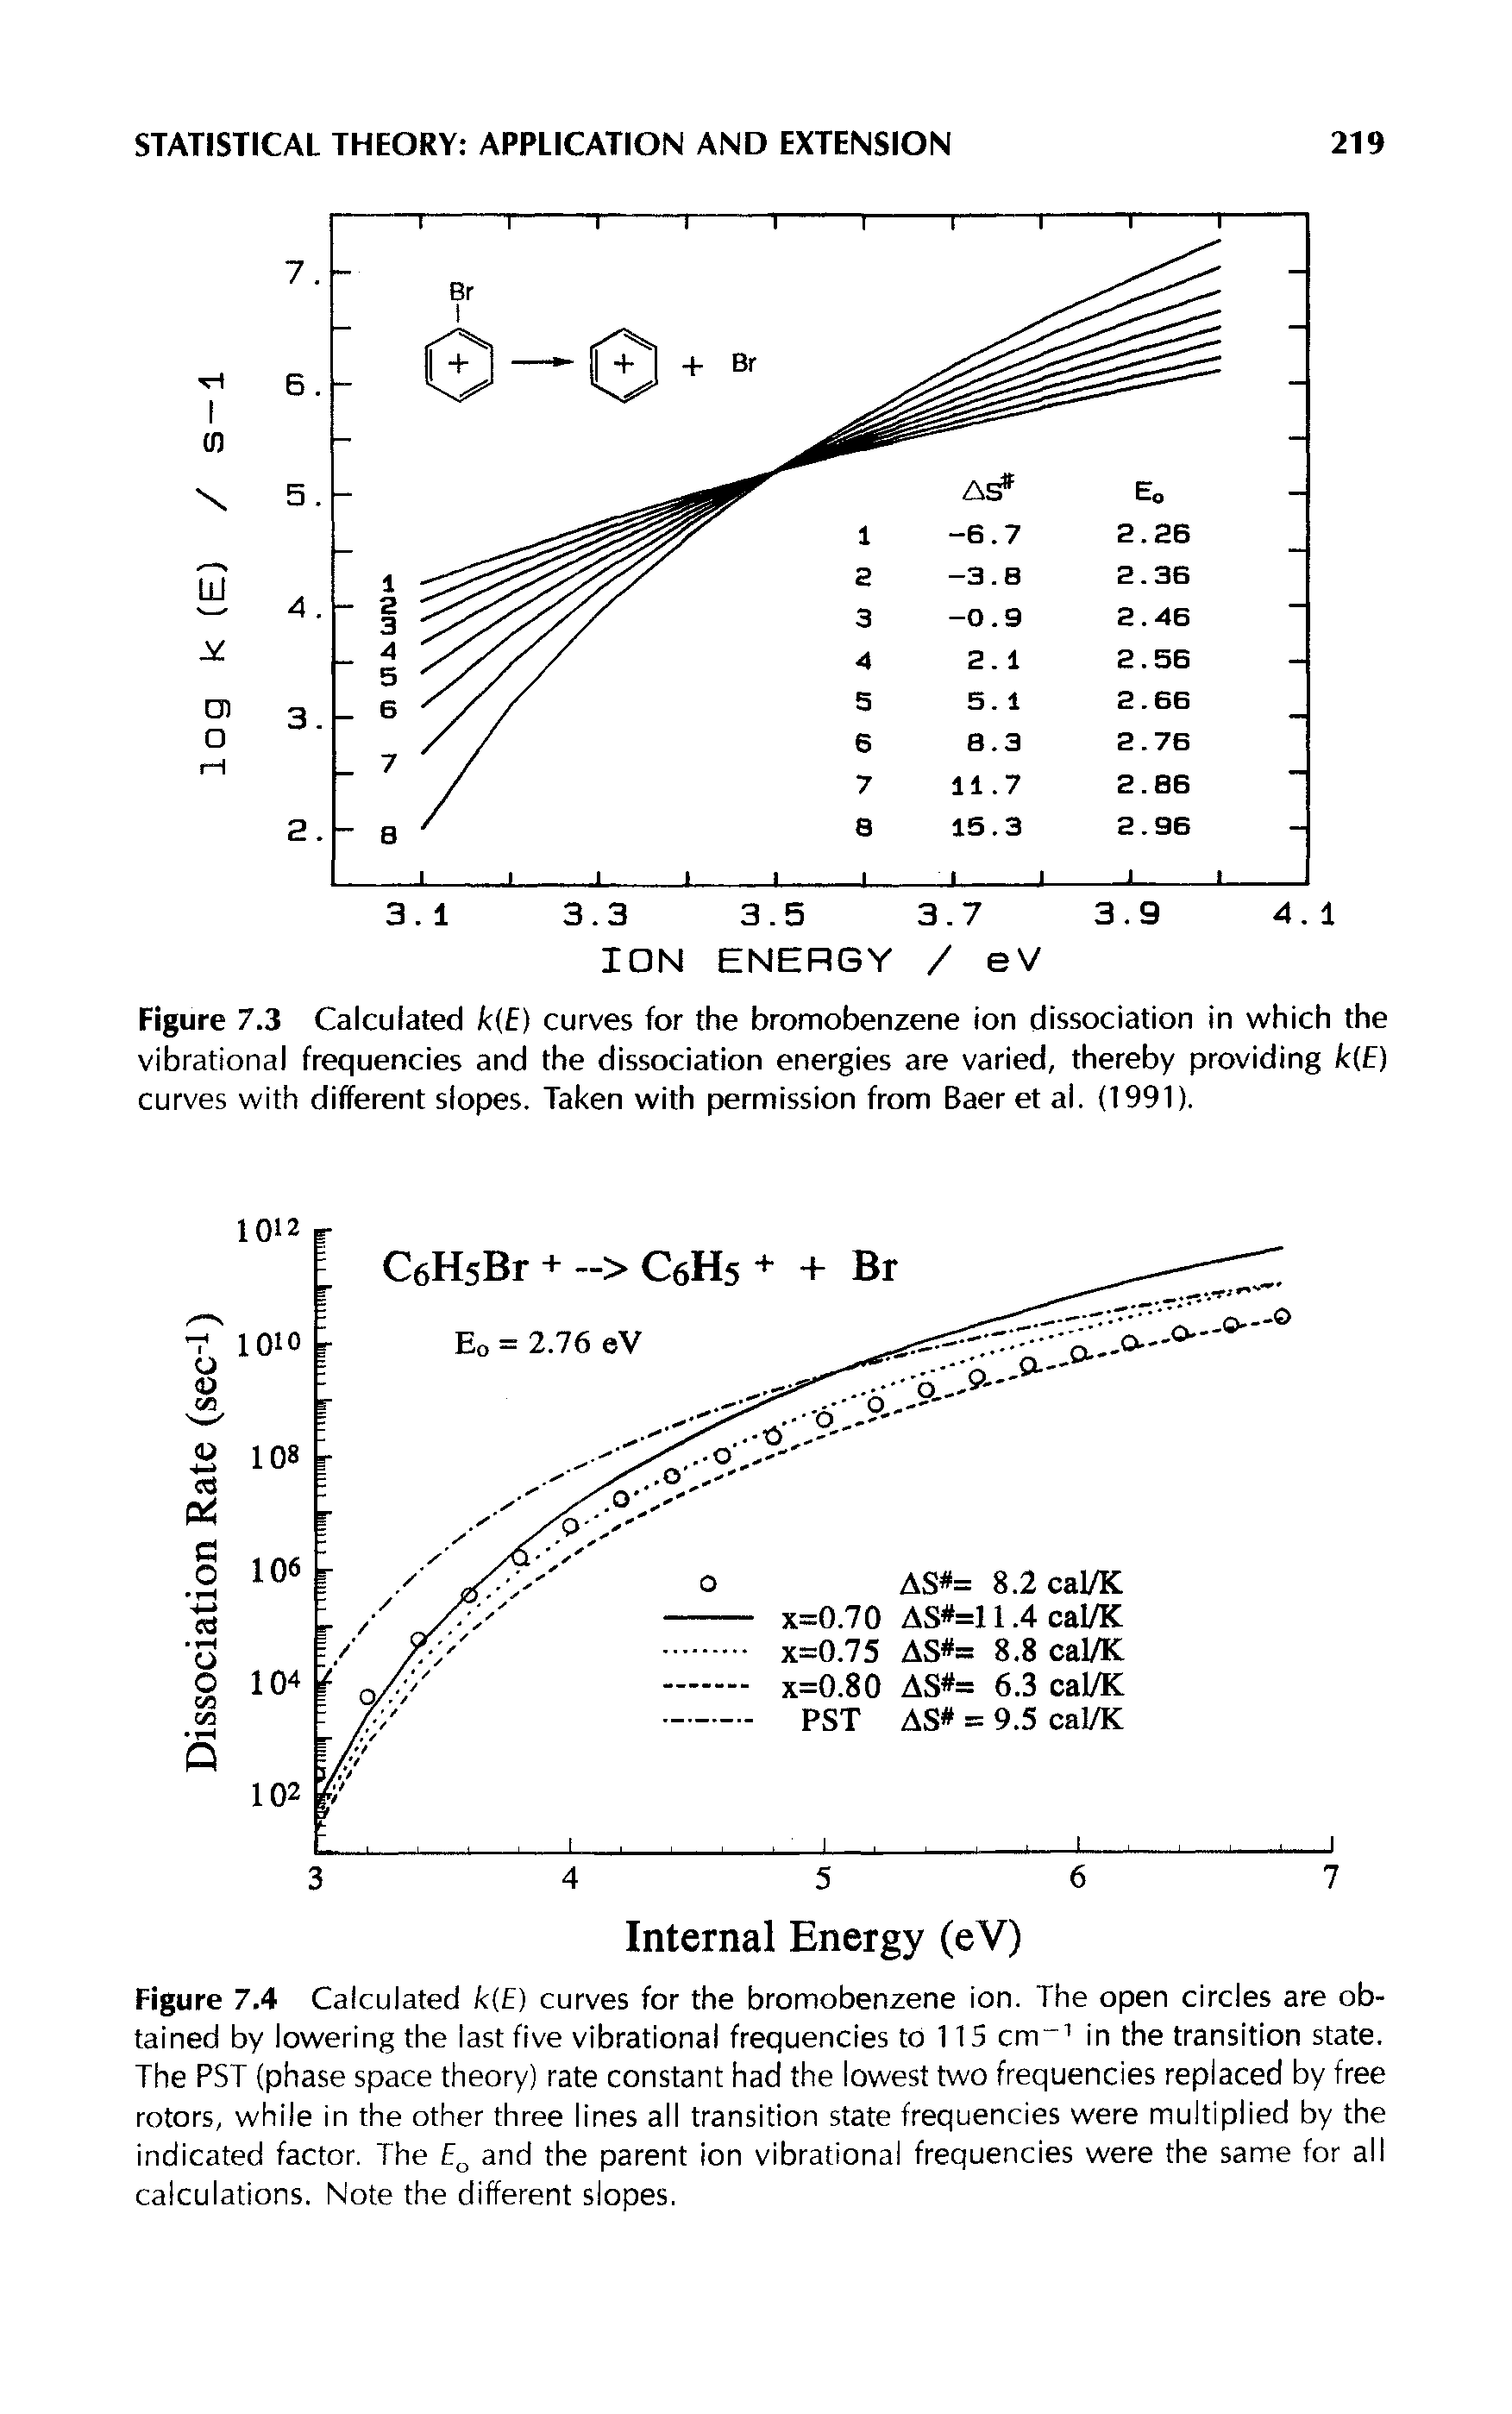 Figure 7.4 Calculated k( ) curves for the bromobenzene ion. The open circles are obtained by lowering the last five vibrational frequencies to 113 cm" in the transition state. The PST (phase space theory) rate constant had the lowest two frequencies replaced by free rotors, while in the other three lines all transition state frequencies were multiplied by the indicated factor. The E and the parent ion vibrational frequencies were the same for all calculations. Note the different slopes.